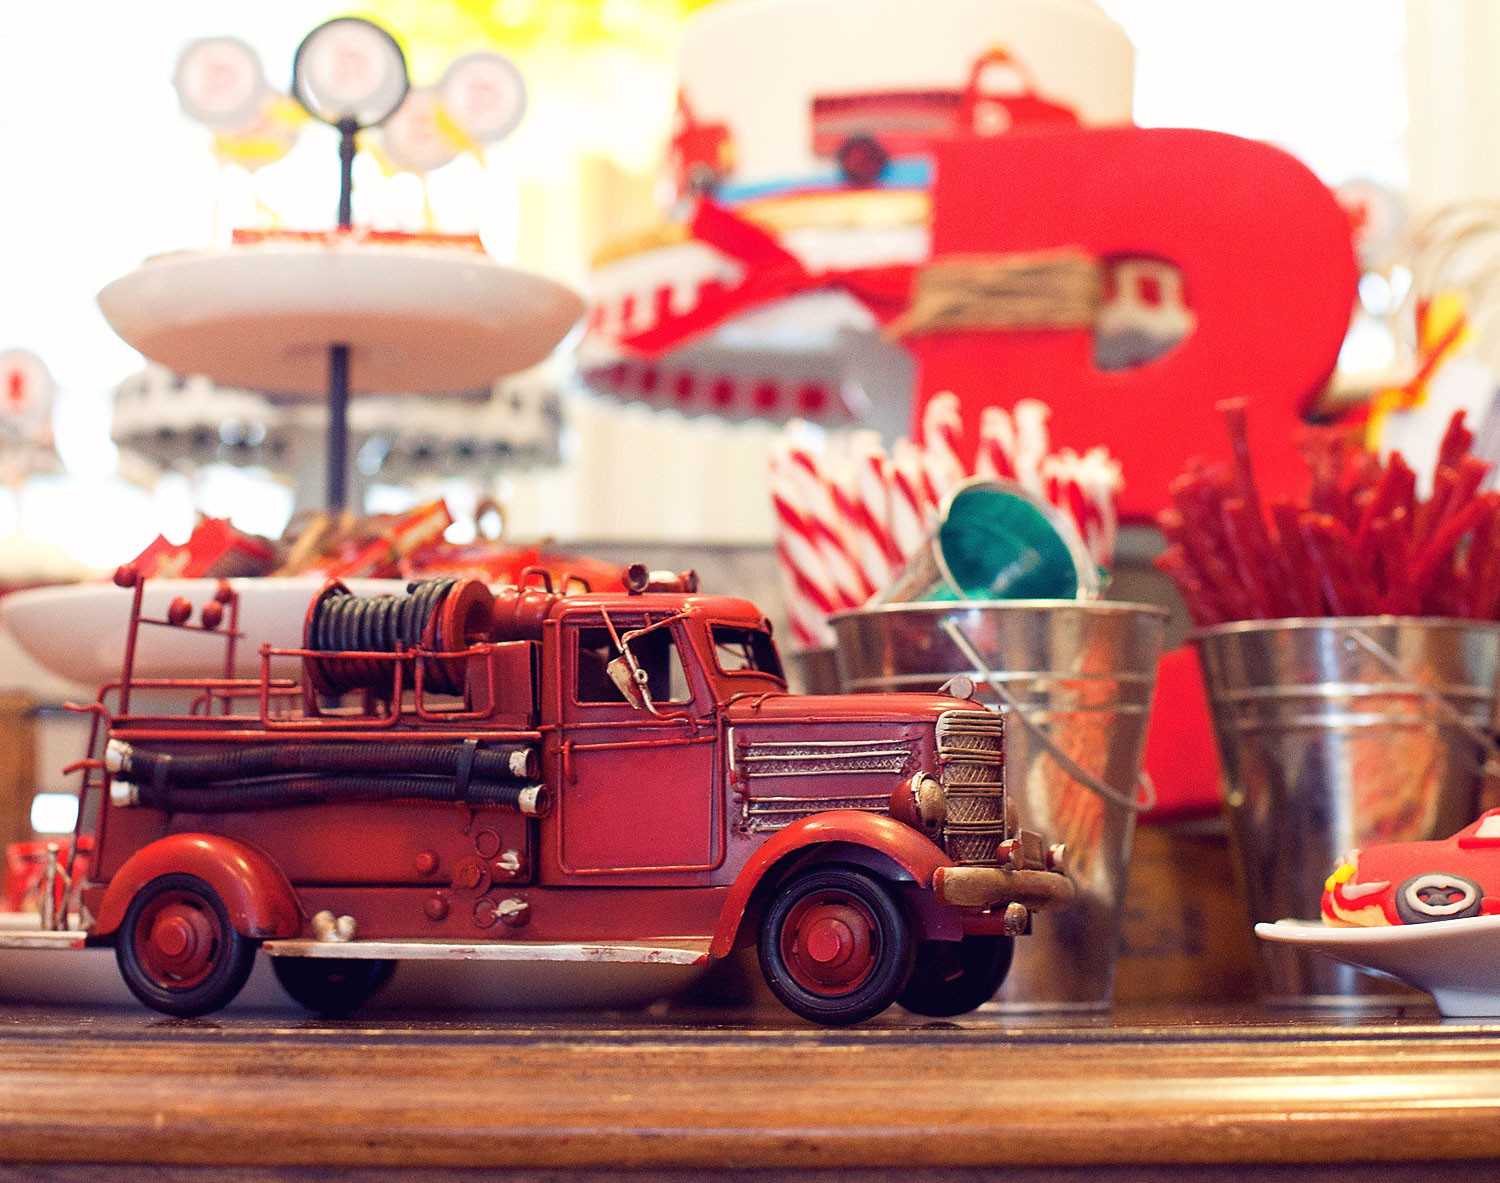 Firetruck Birthday Party Supplies
 A Vintage Firetruck Birthday Party Anders Ruff Custom